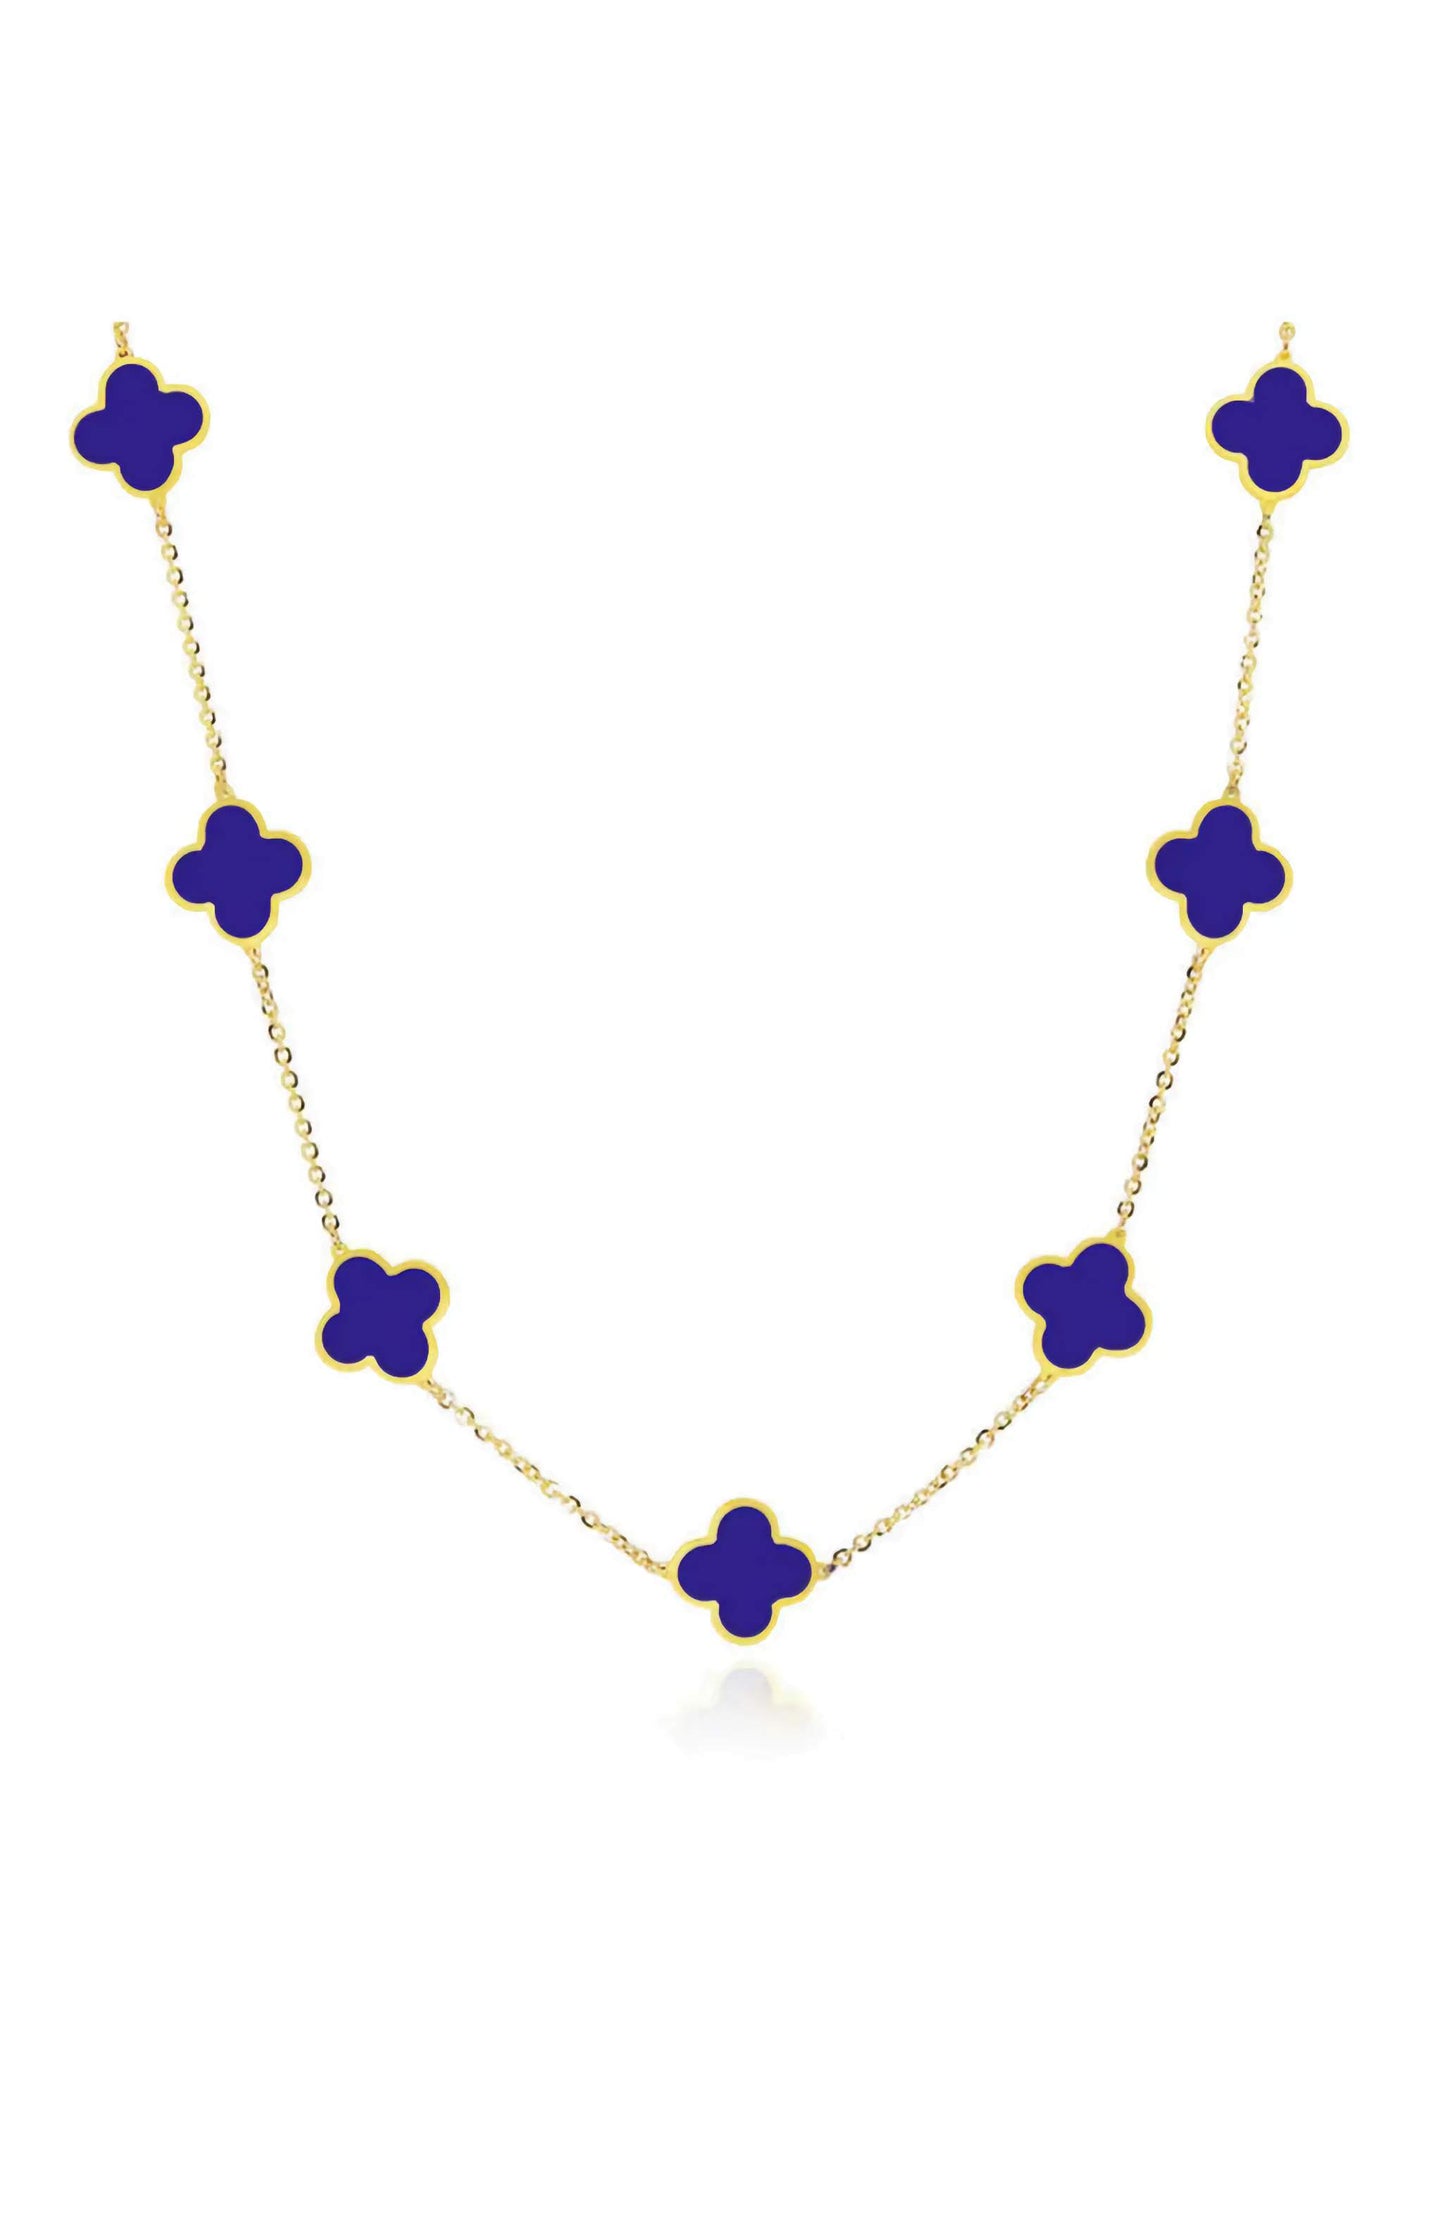 10K Yellow Gold Royal Blue Clover Necklace